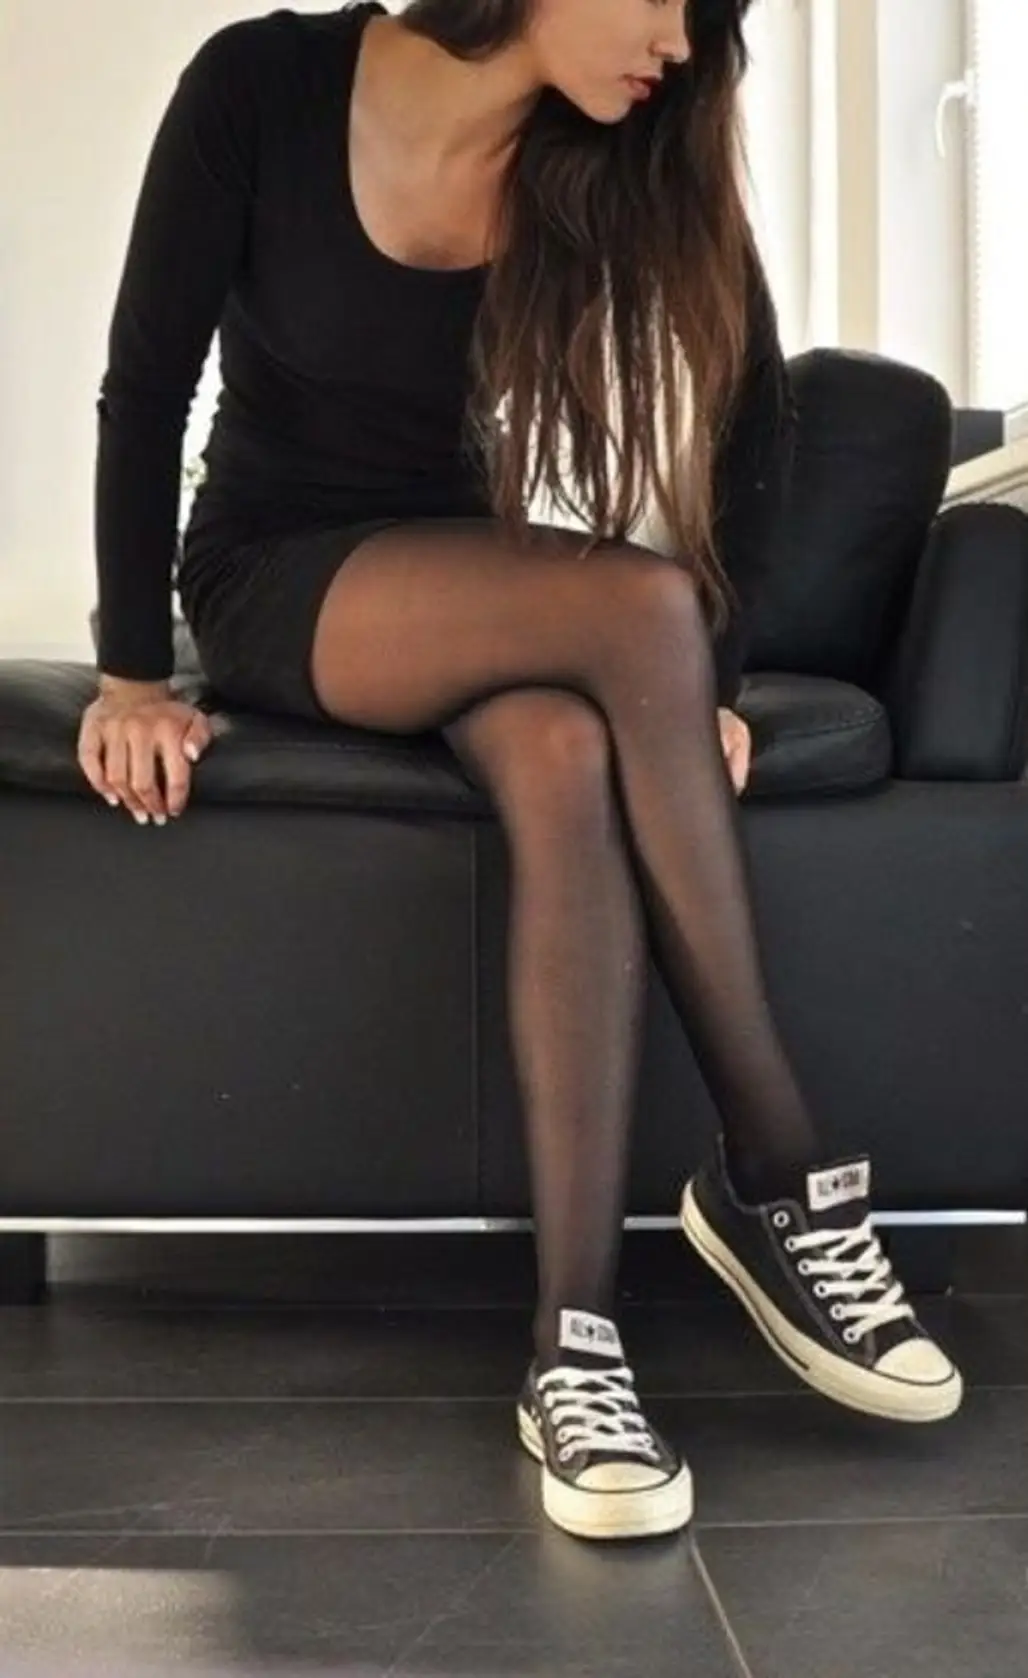 Wearing Flat Sneakers Accentuates Your Toned Legs, Especially when Paired with Stockings